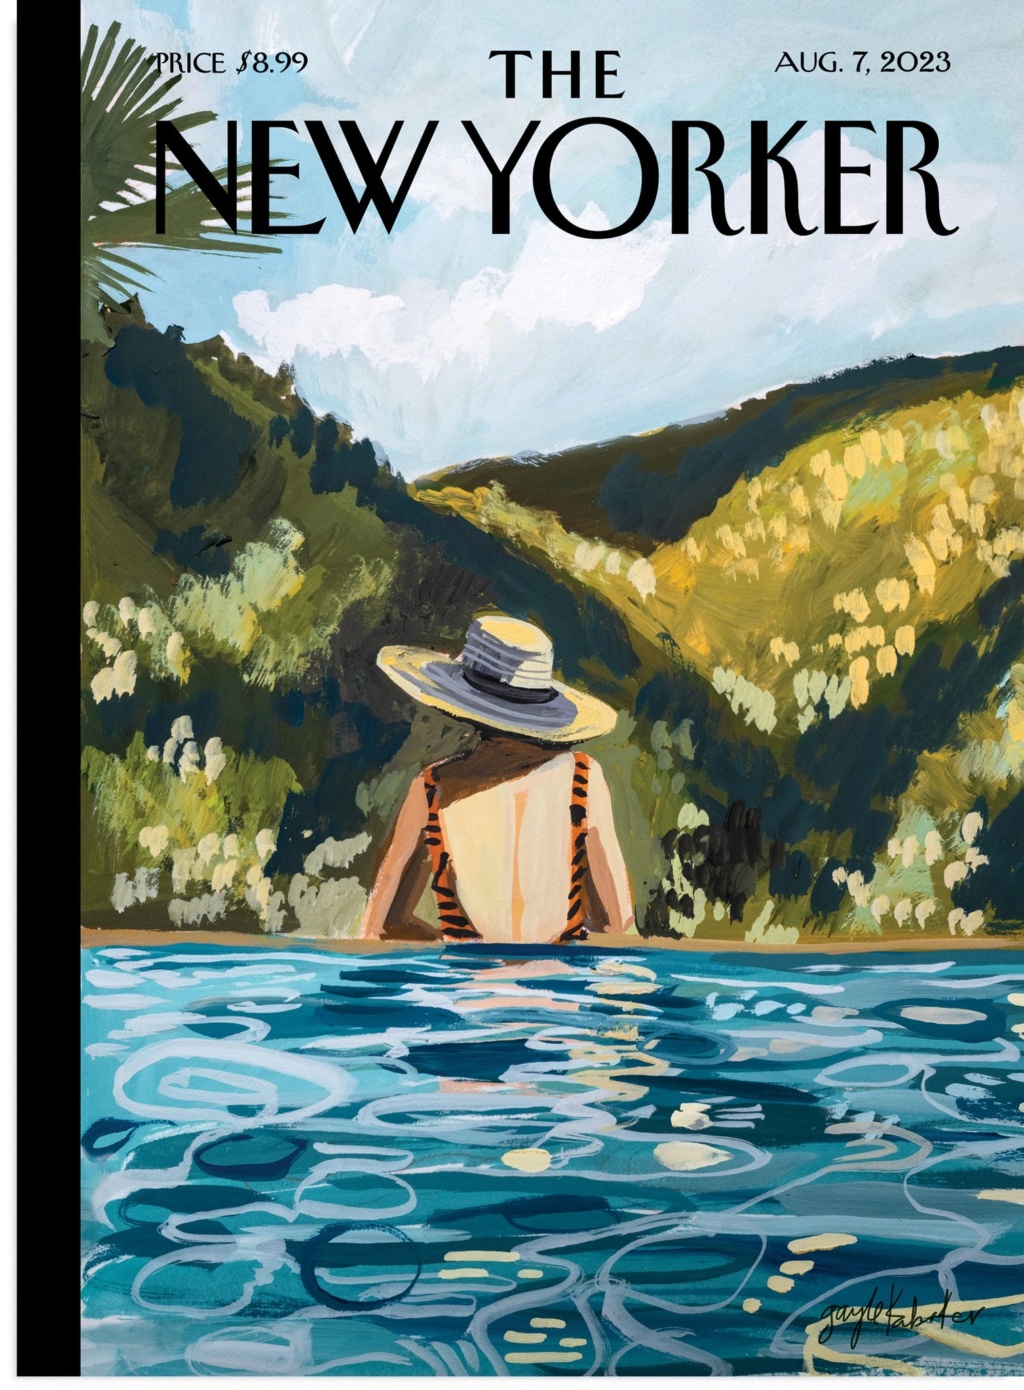 The New Yorker : Les couvertures - Page 5 Gayle_10